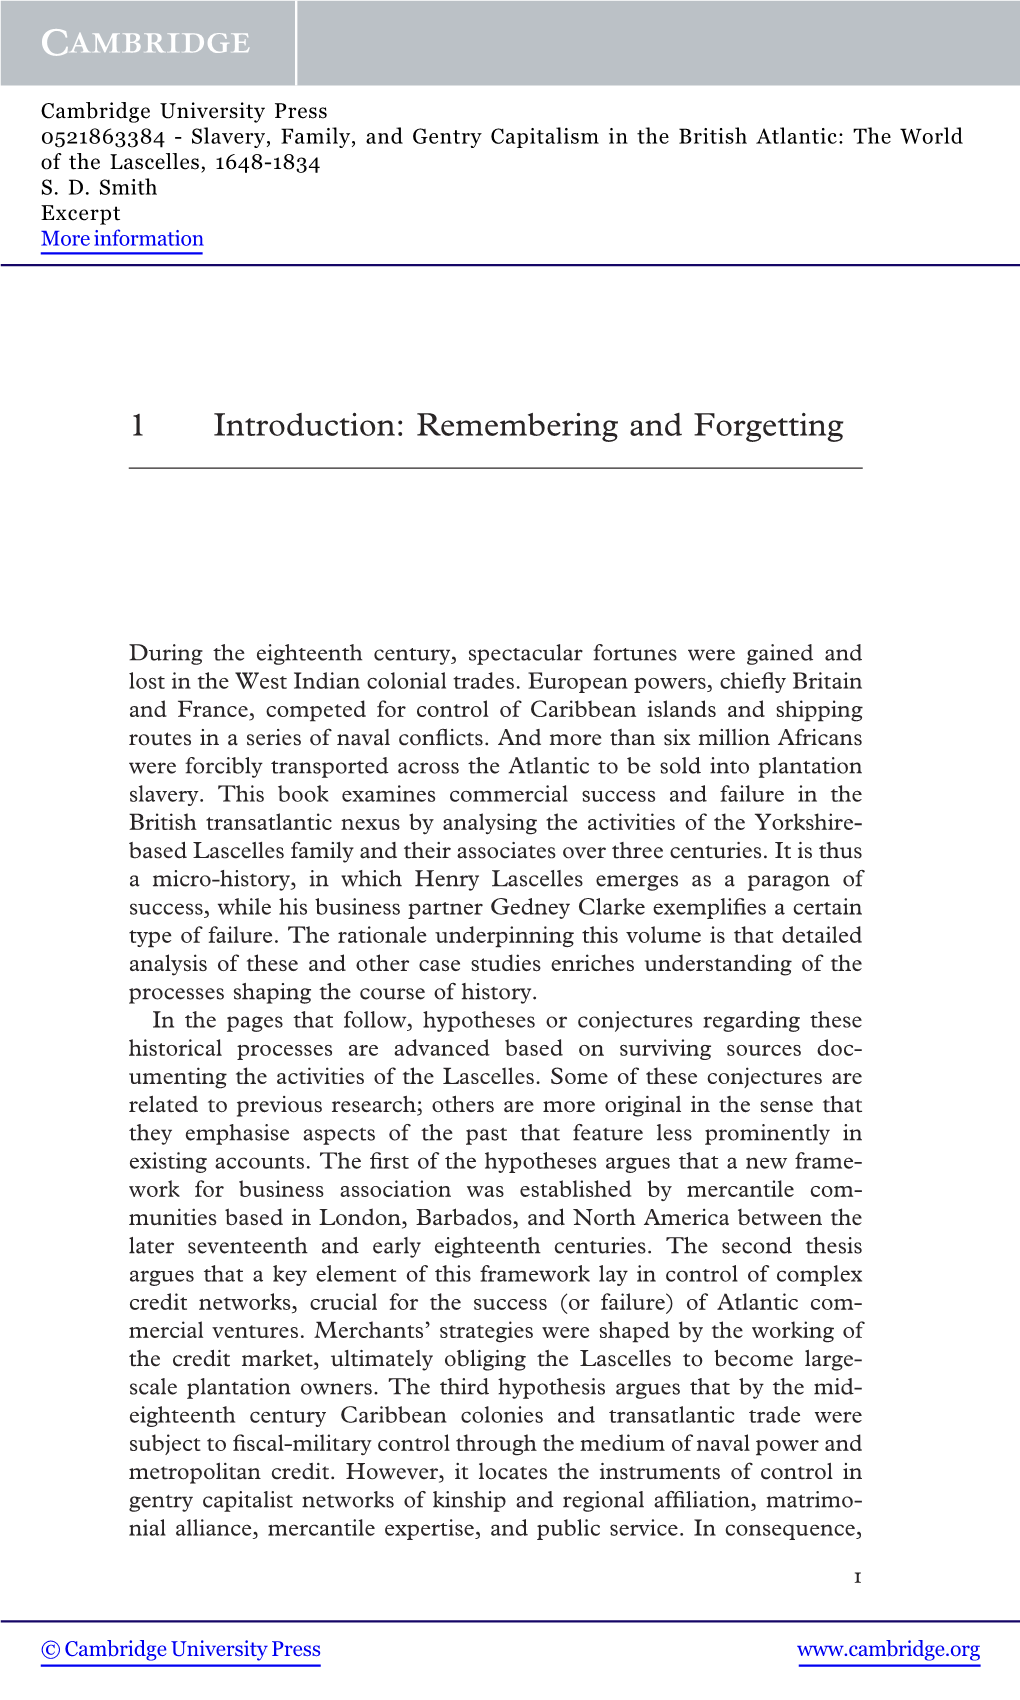 1 Introduction: Remembering and Forgetting